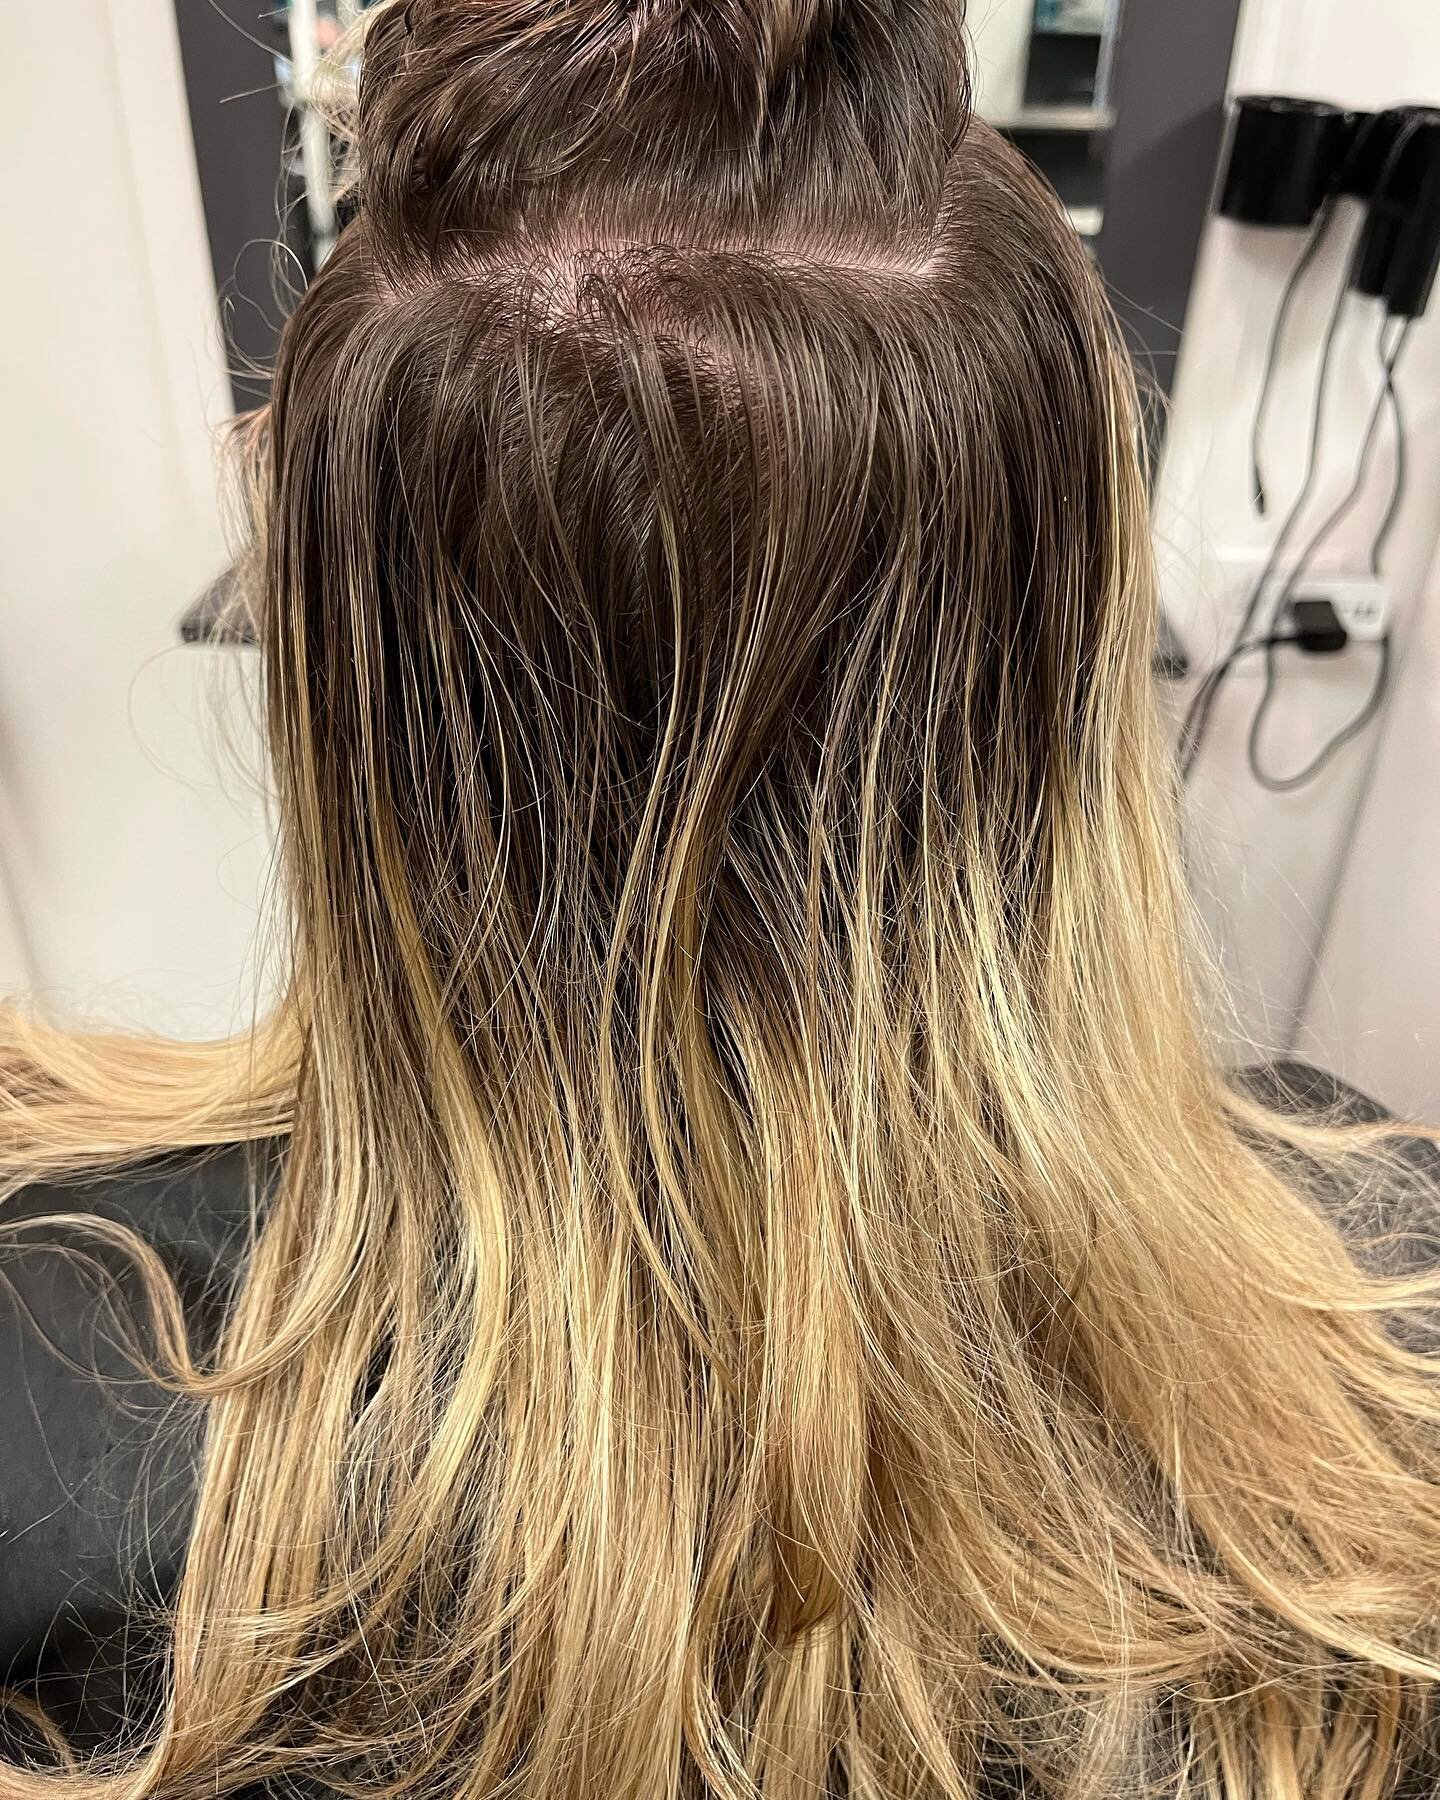 How&rsquo;s that for a little before and after action☀️

Beyond inlove with this warm honey blonde transformation💛 

Hair by: @sarah.davis91 

&bull;
&bull;
&bull;
#beautifulblonde #honeyblonde #warmblonde #babylights #beforeandafter #dimensionalblo